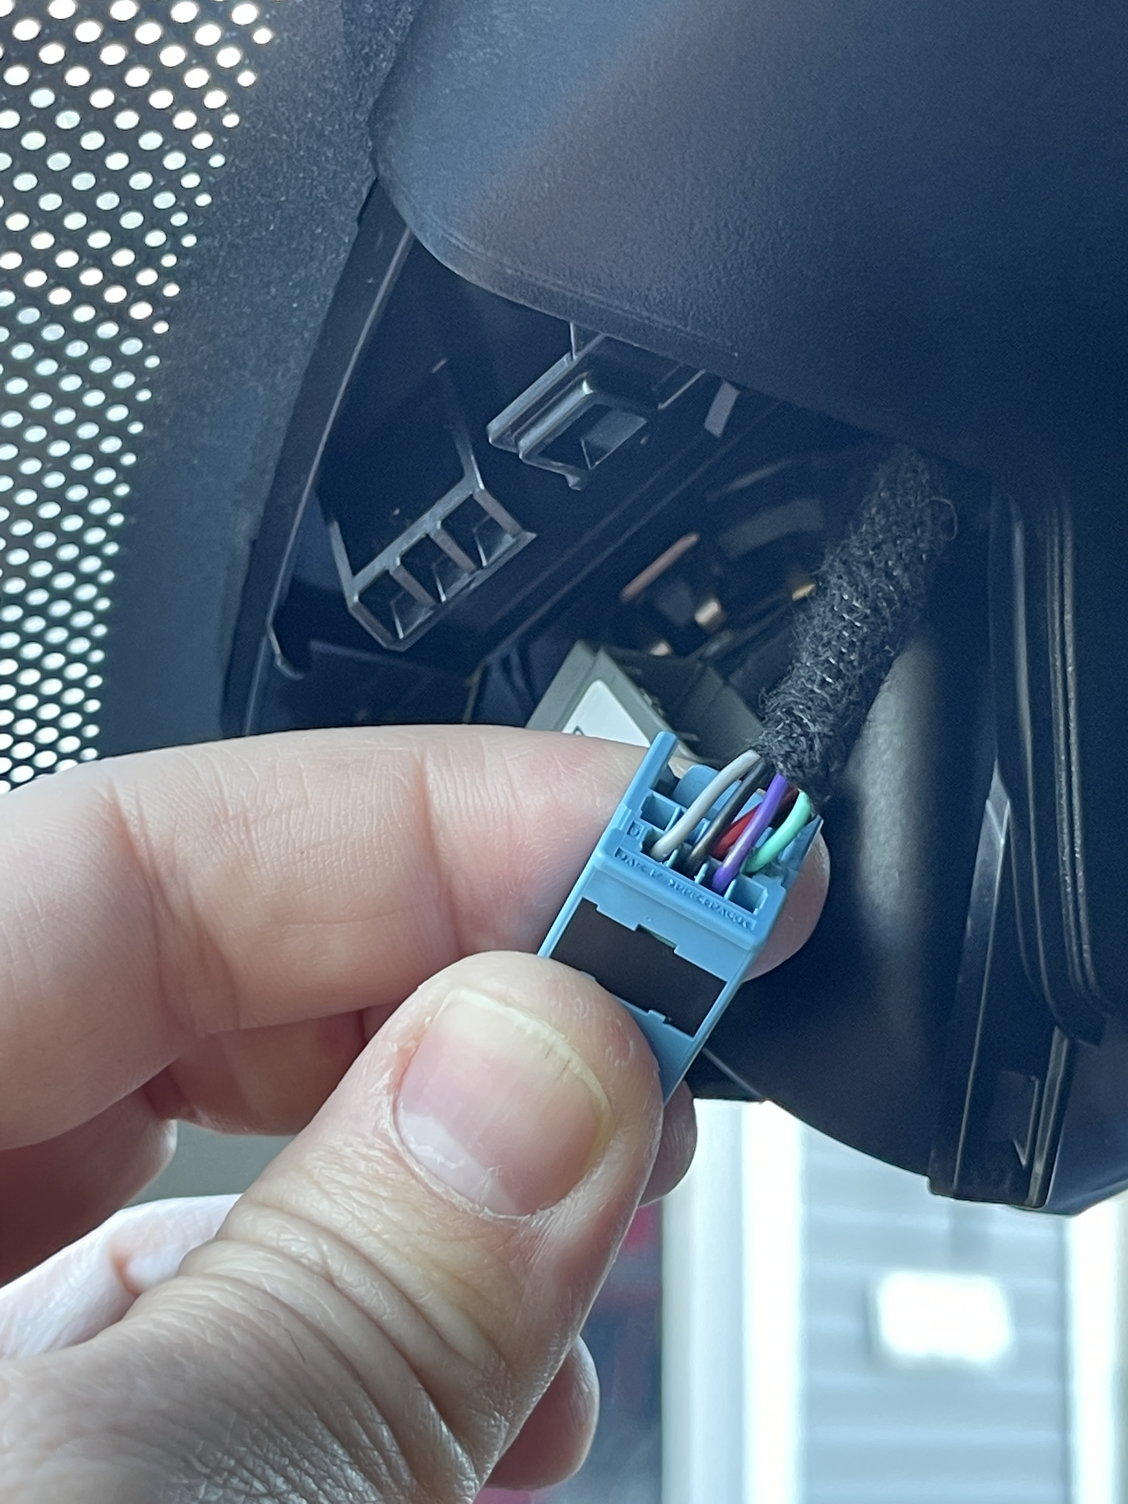 Mirror tap radar and no wires hanging for dash cam : r/Acura